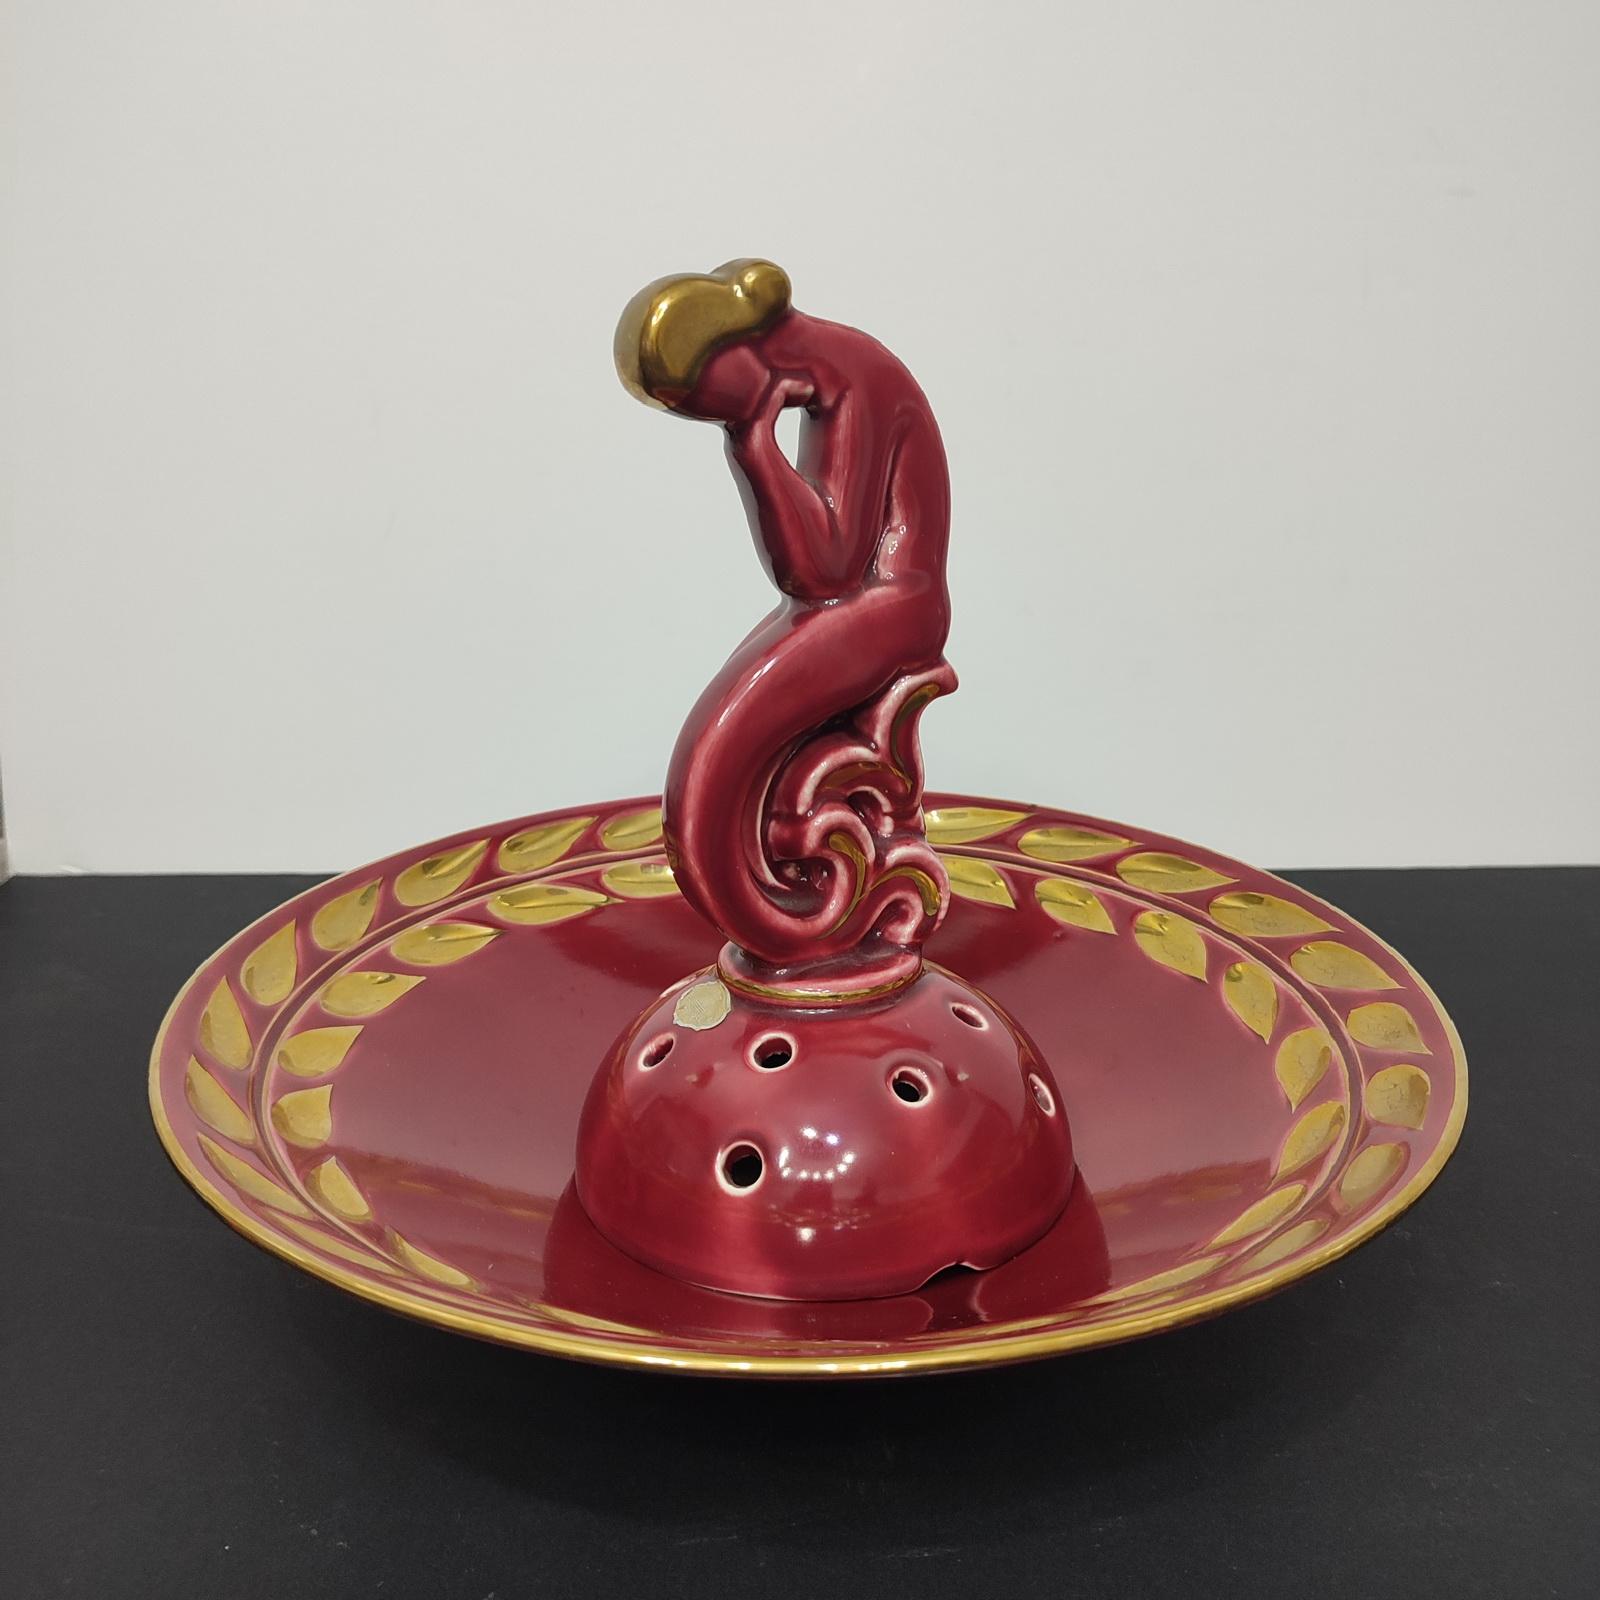 Art Deco Porcelain bowl and flower stand, Rubin Red, Arthur Percy for Gefle.
Gorgeous ruby red glaze enhanced with gold accents. Maker's mark under the bottom and original label on the flower frog. In excellent condition.
Diameter 27cm
Height 22